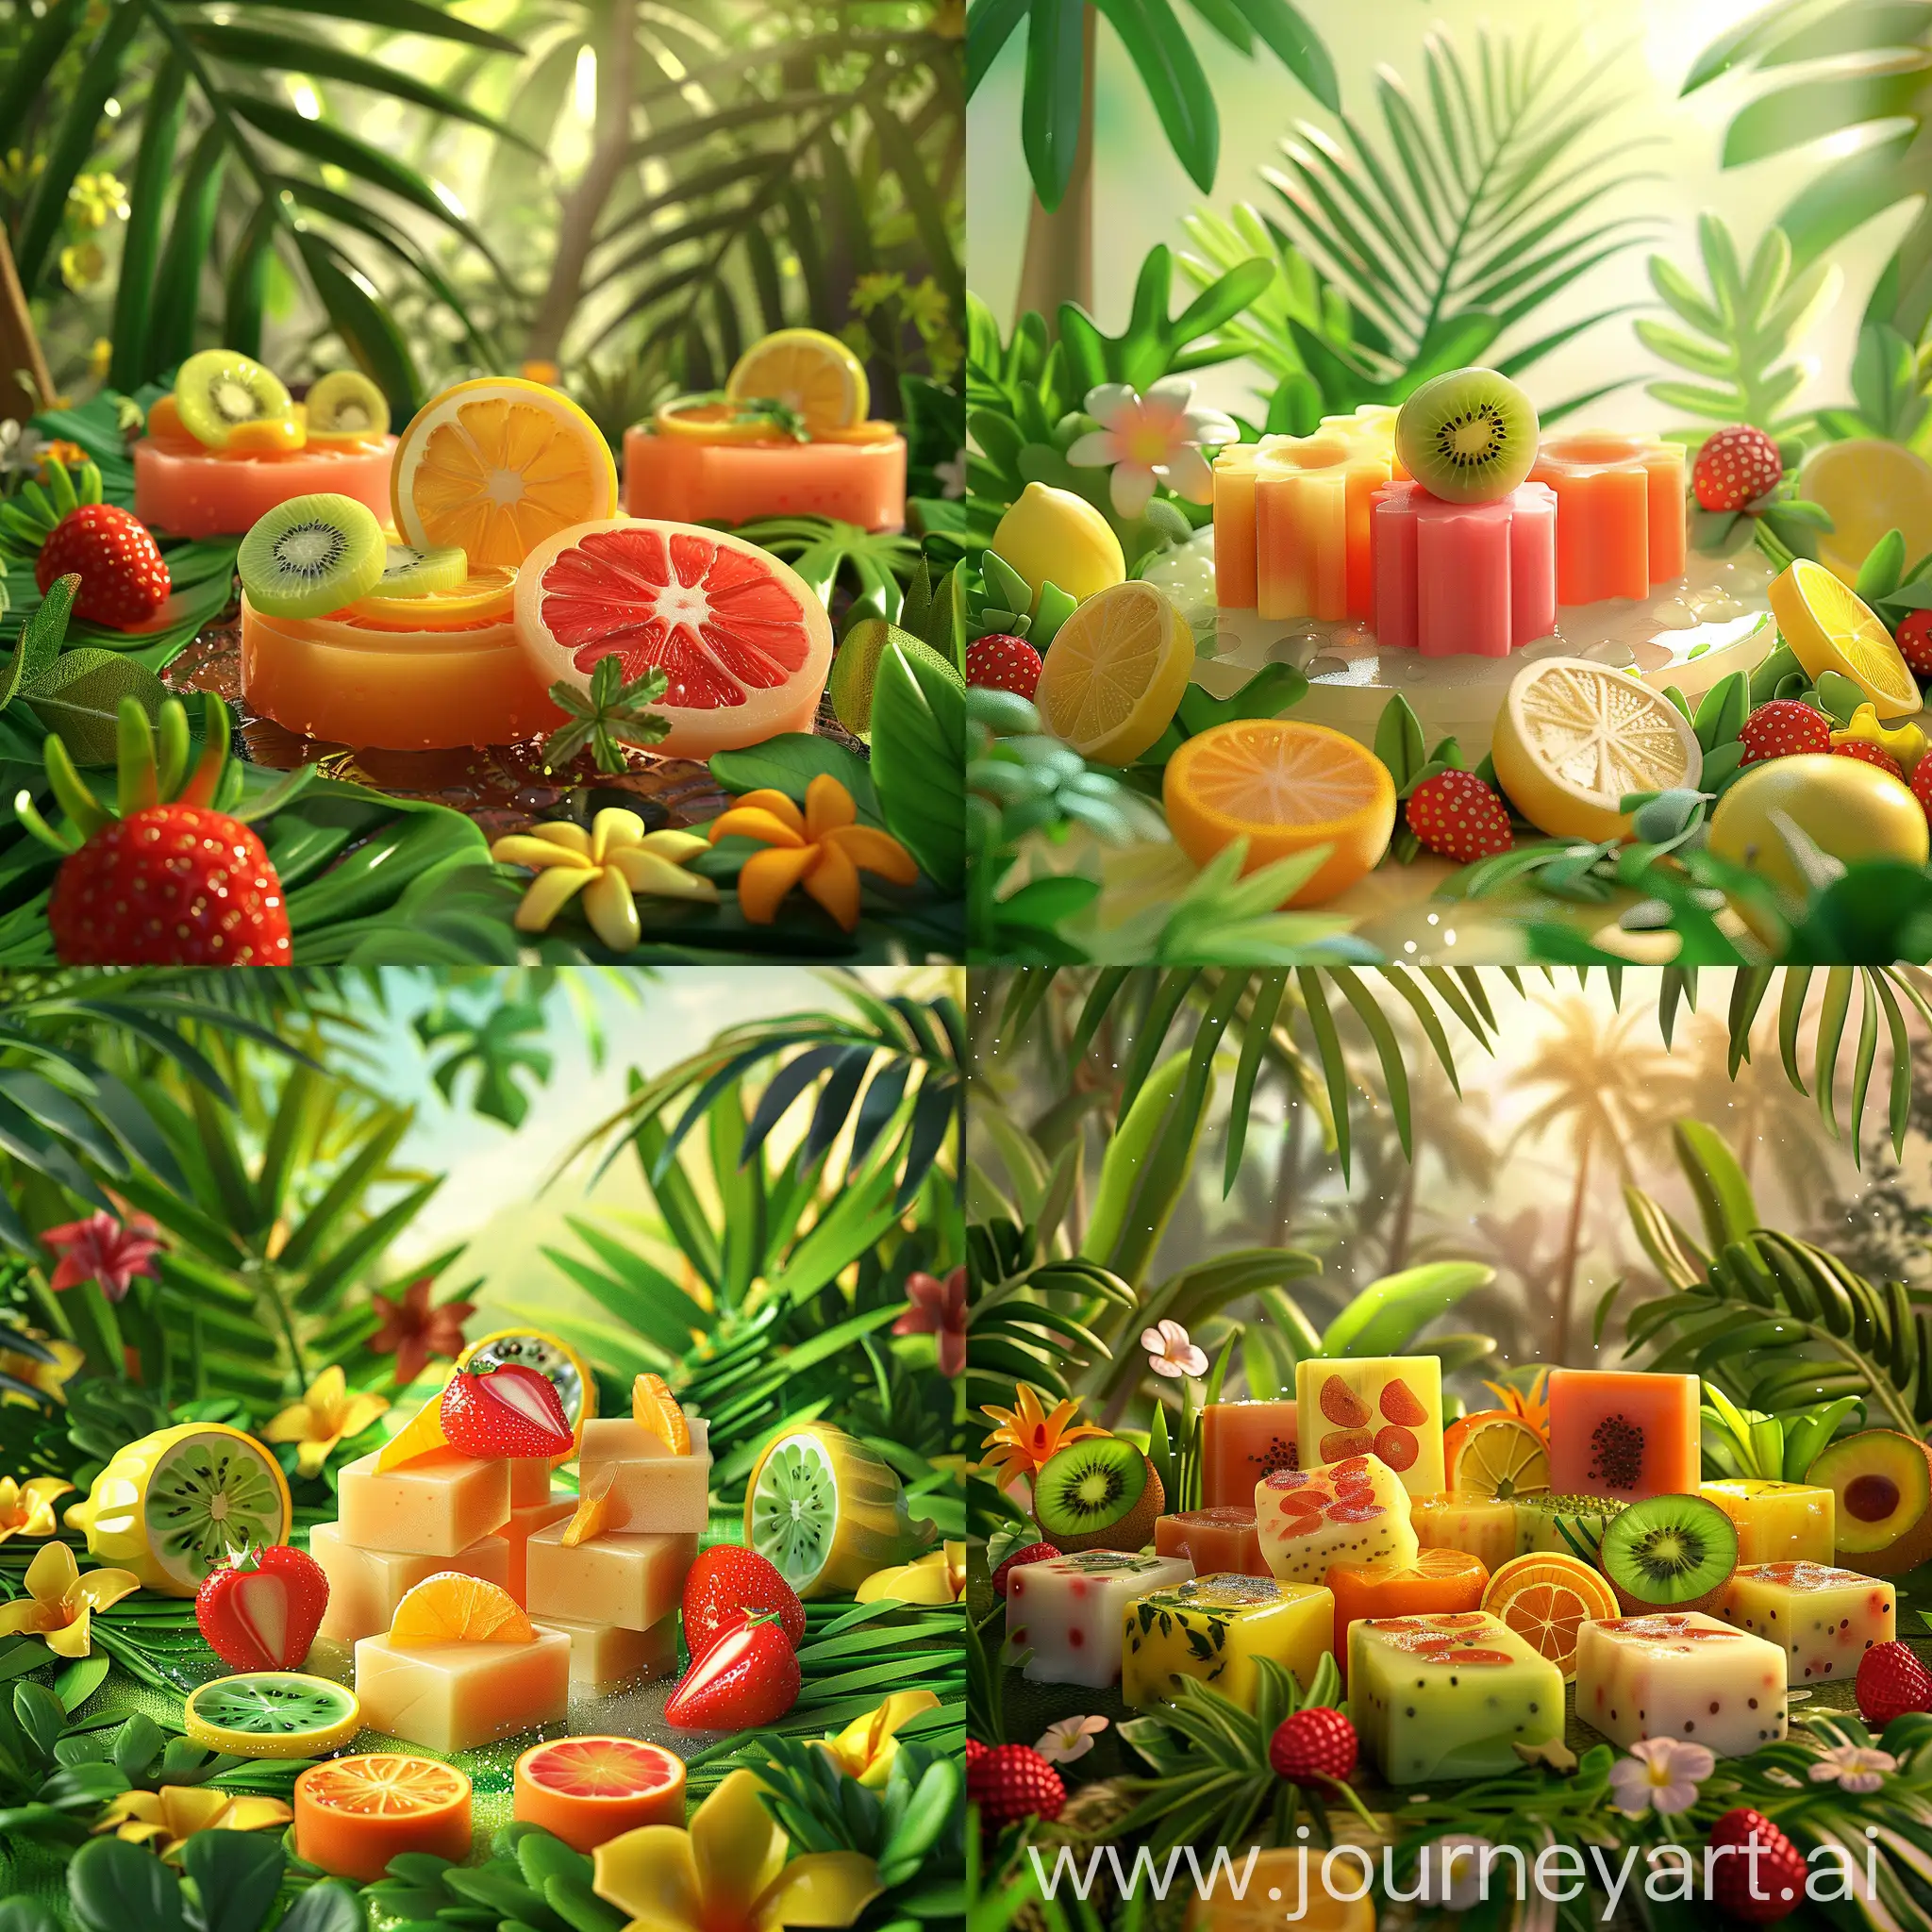 Tropical-Fruit-Soap-Centerpiece-Vibrant-Fruits-Amidst-Lush-Greenery